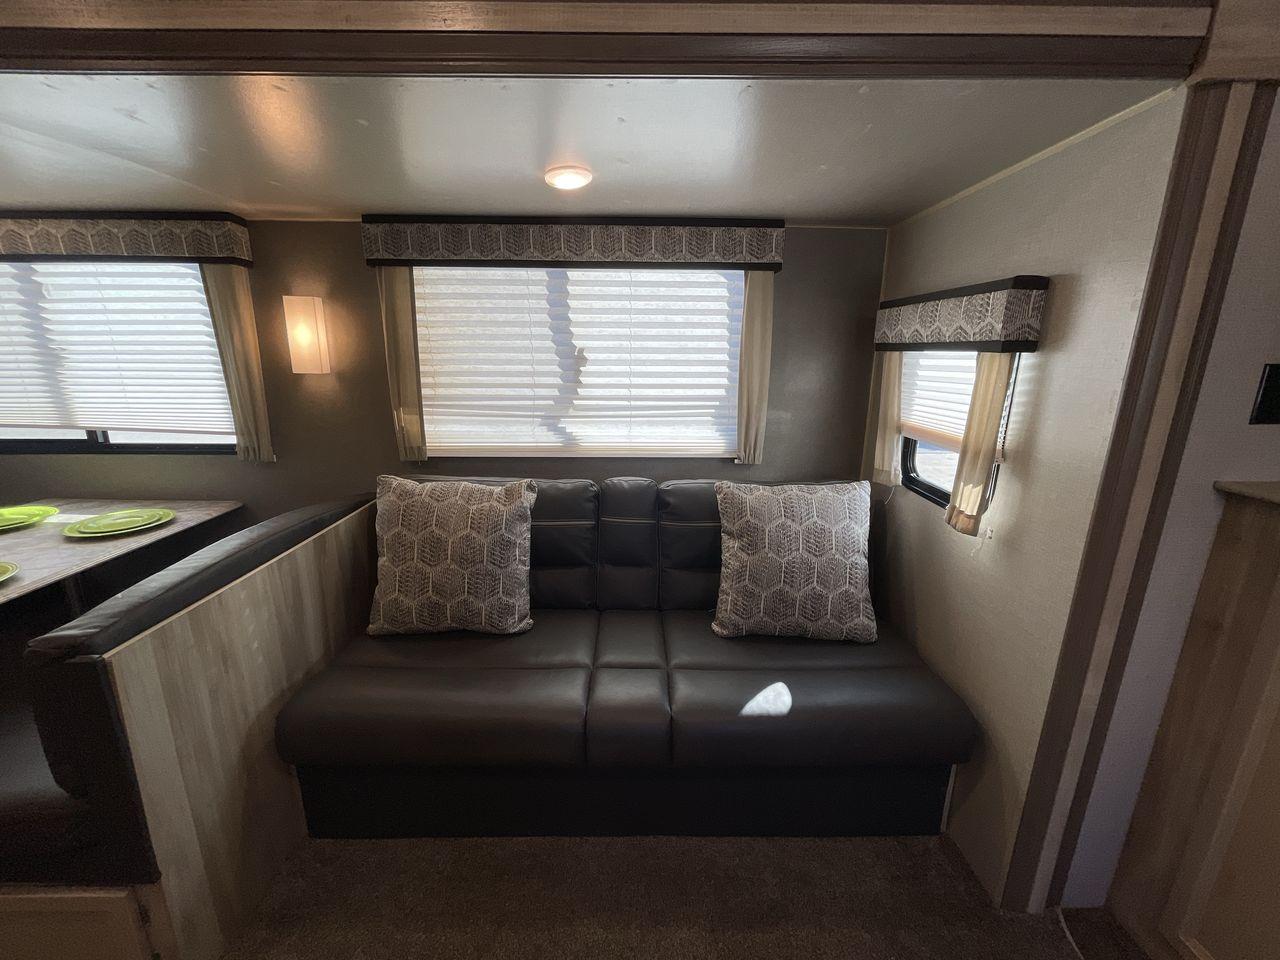 2021 COACHMEN CATALINA 243RBS (5ZT2CANBXMU) , Length: 28.75 ft. | Dry Weight: 5,692 lbs. | Gross Weight: 7,600 lbs. | Slides: 1 transmission, located at 4319 N Main Street, Cleburne, TX, 76033, (817) 221-0660, 32.435829, -97.384178 - The 2021 Forest River Catalina 243RBS travel trailer offers a spacious floorplan that is truly comfortable and convenient. As you enter the trailer, you will find a cozy front bedroom with a lovely queen bed where you can relax and rejuvenate yourself after enjoying the great outdoors. You also have - Photo #12